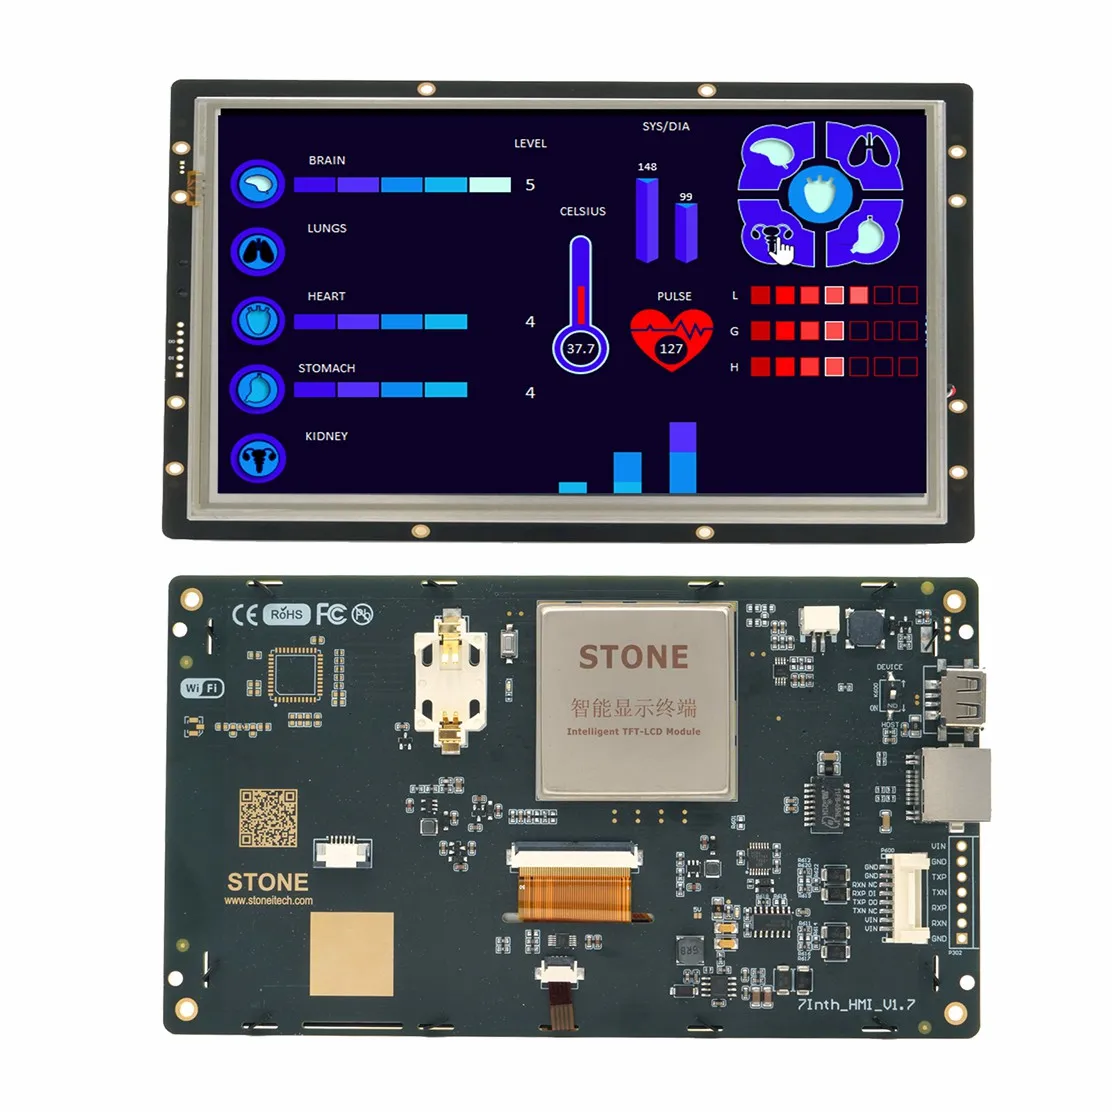 SCBRHMI LCD Touch Display - 7 800x480 TFT Intelligent Resistive Touch Screen Module